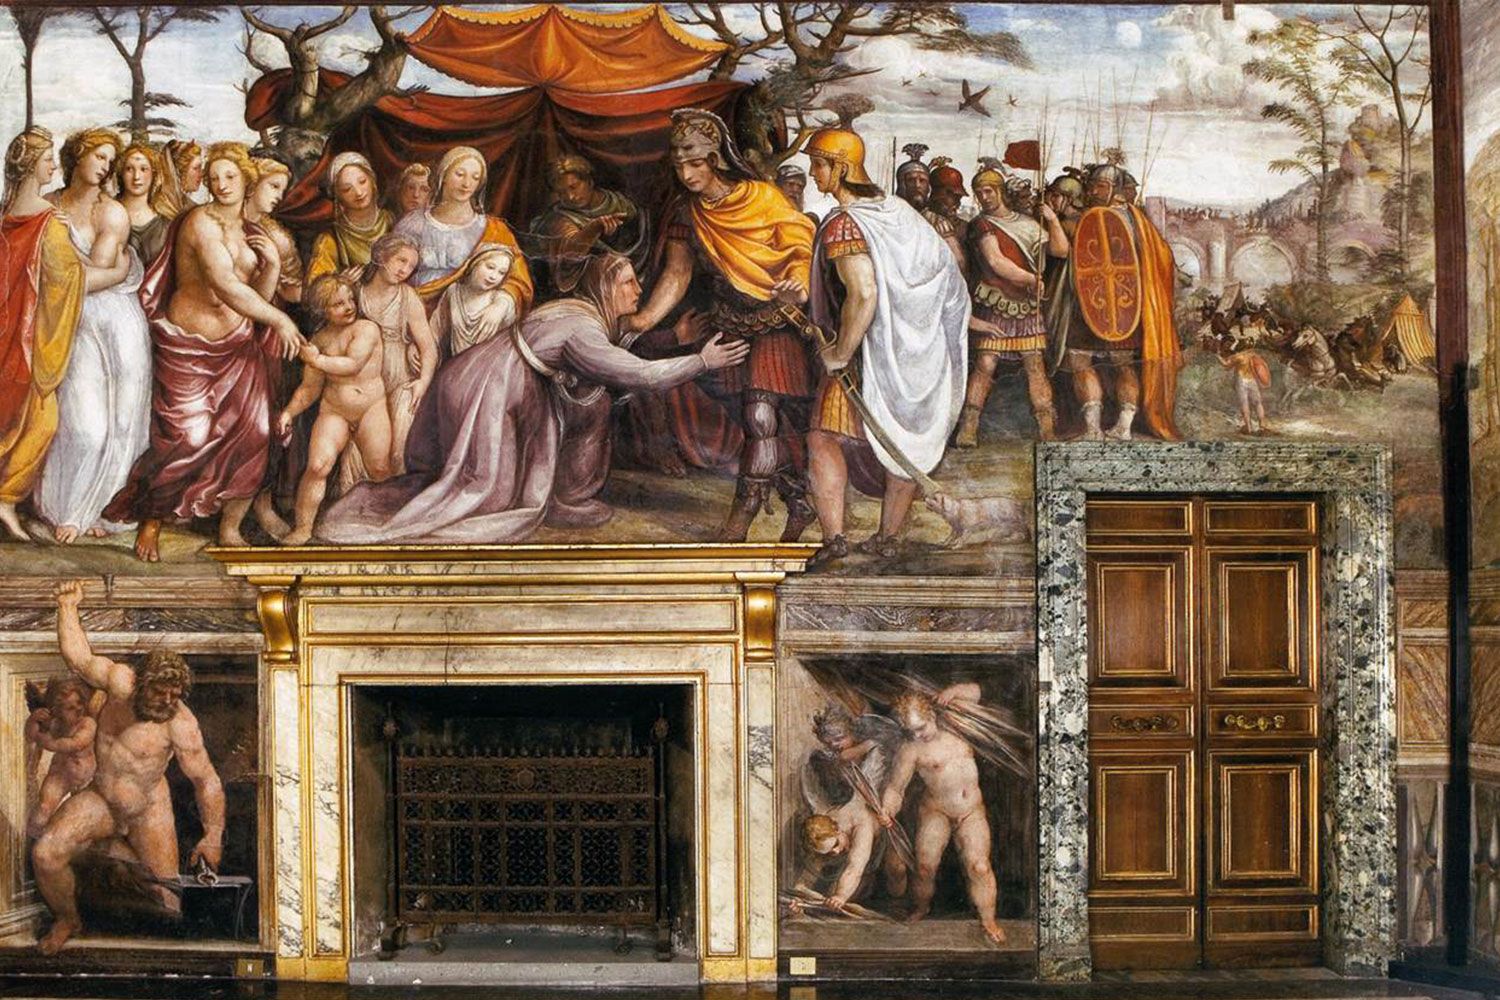 “The Women of Darius's Family before Alexander the Great” by Sodoma (c.1517). Painted as a fresco in the Villa Farnesina in Rome.